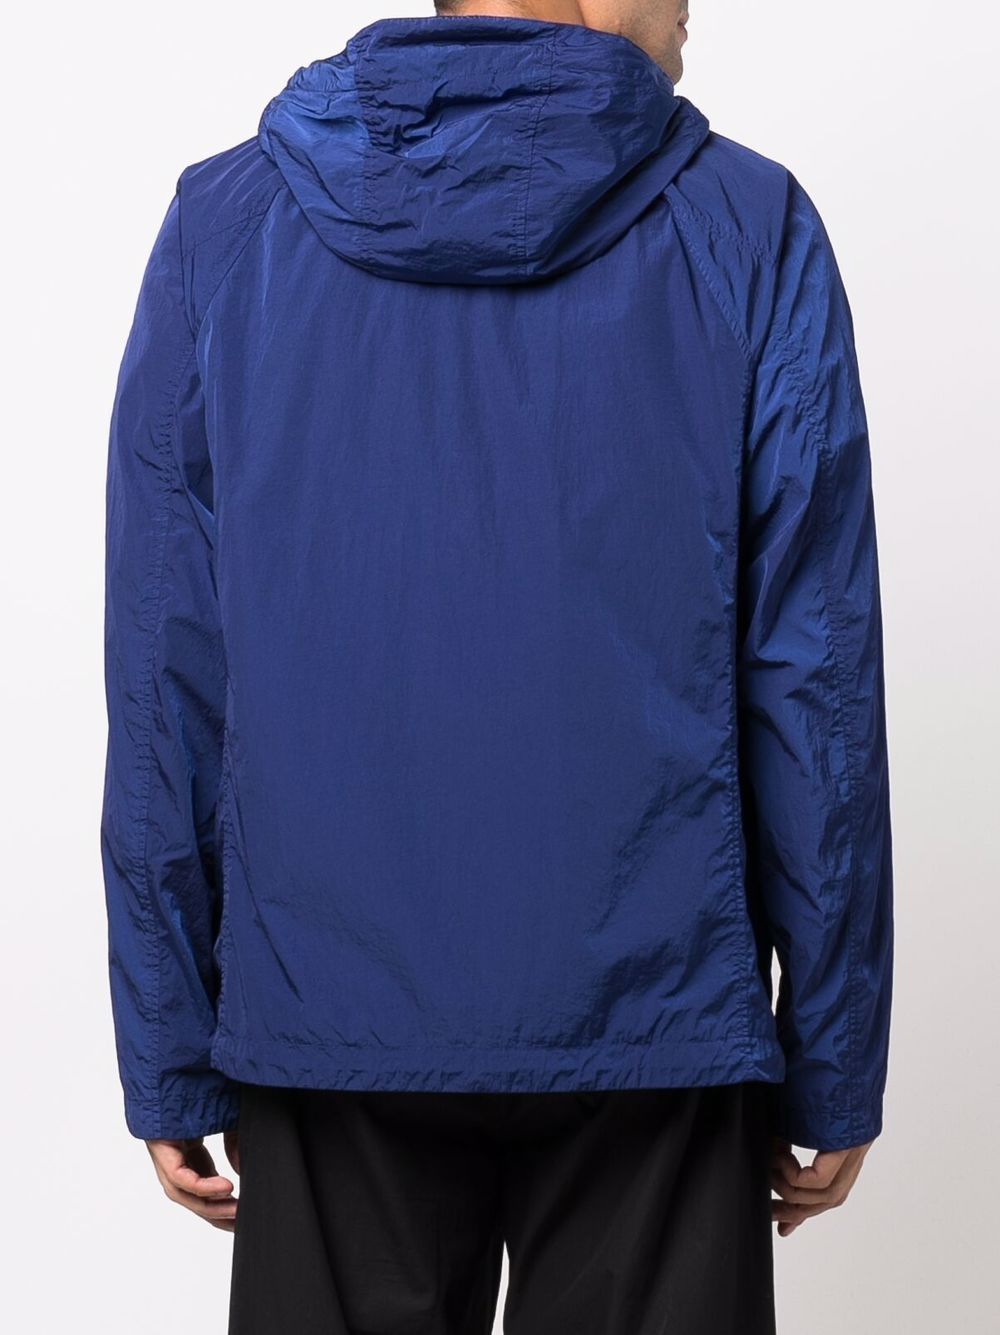 hooded pull-over jacket